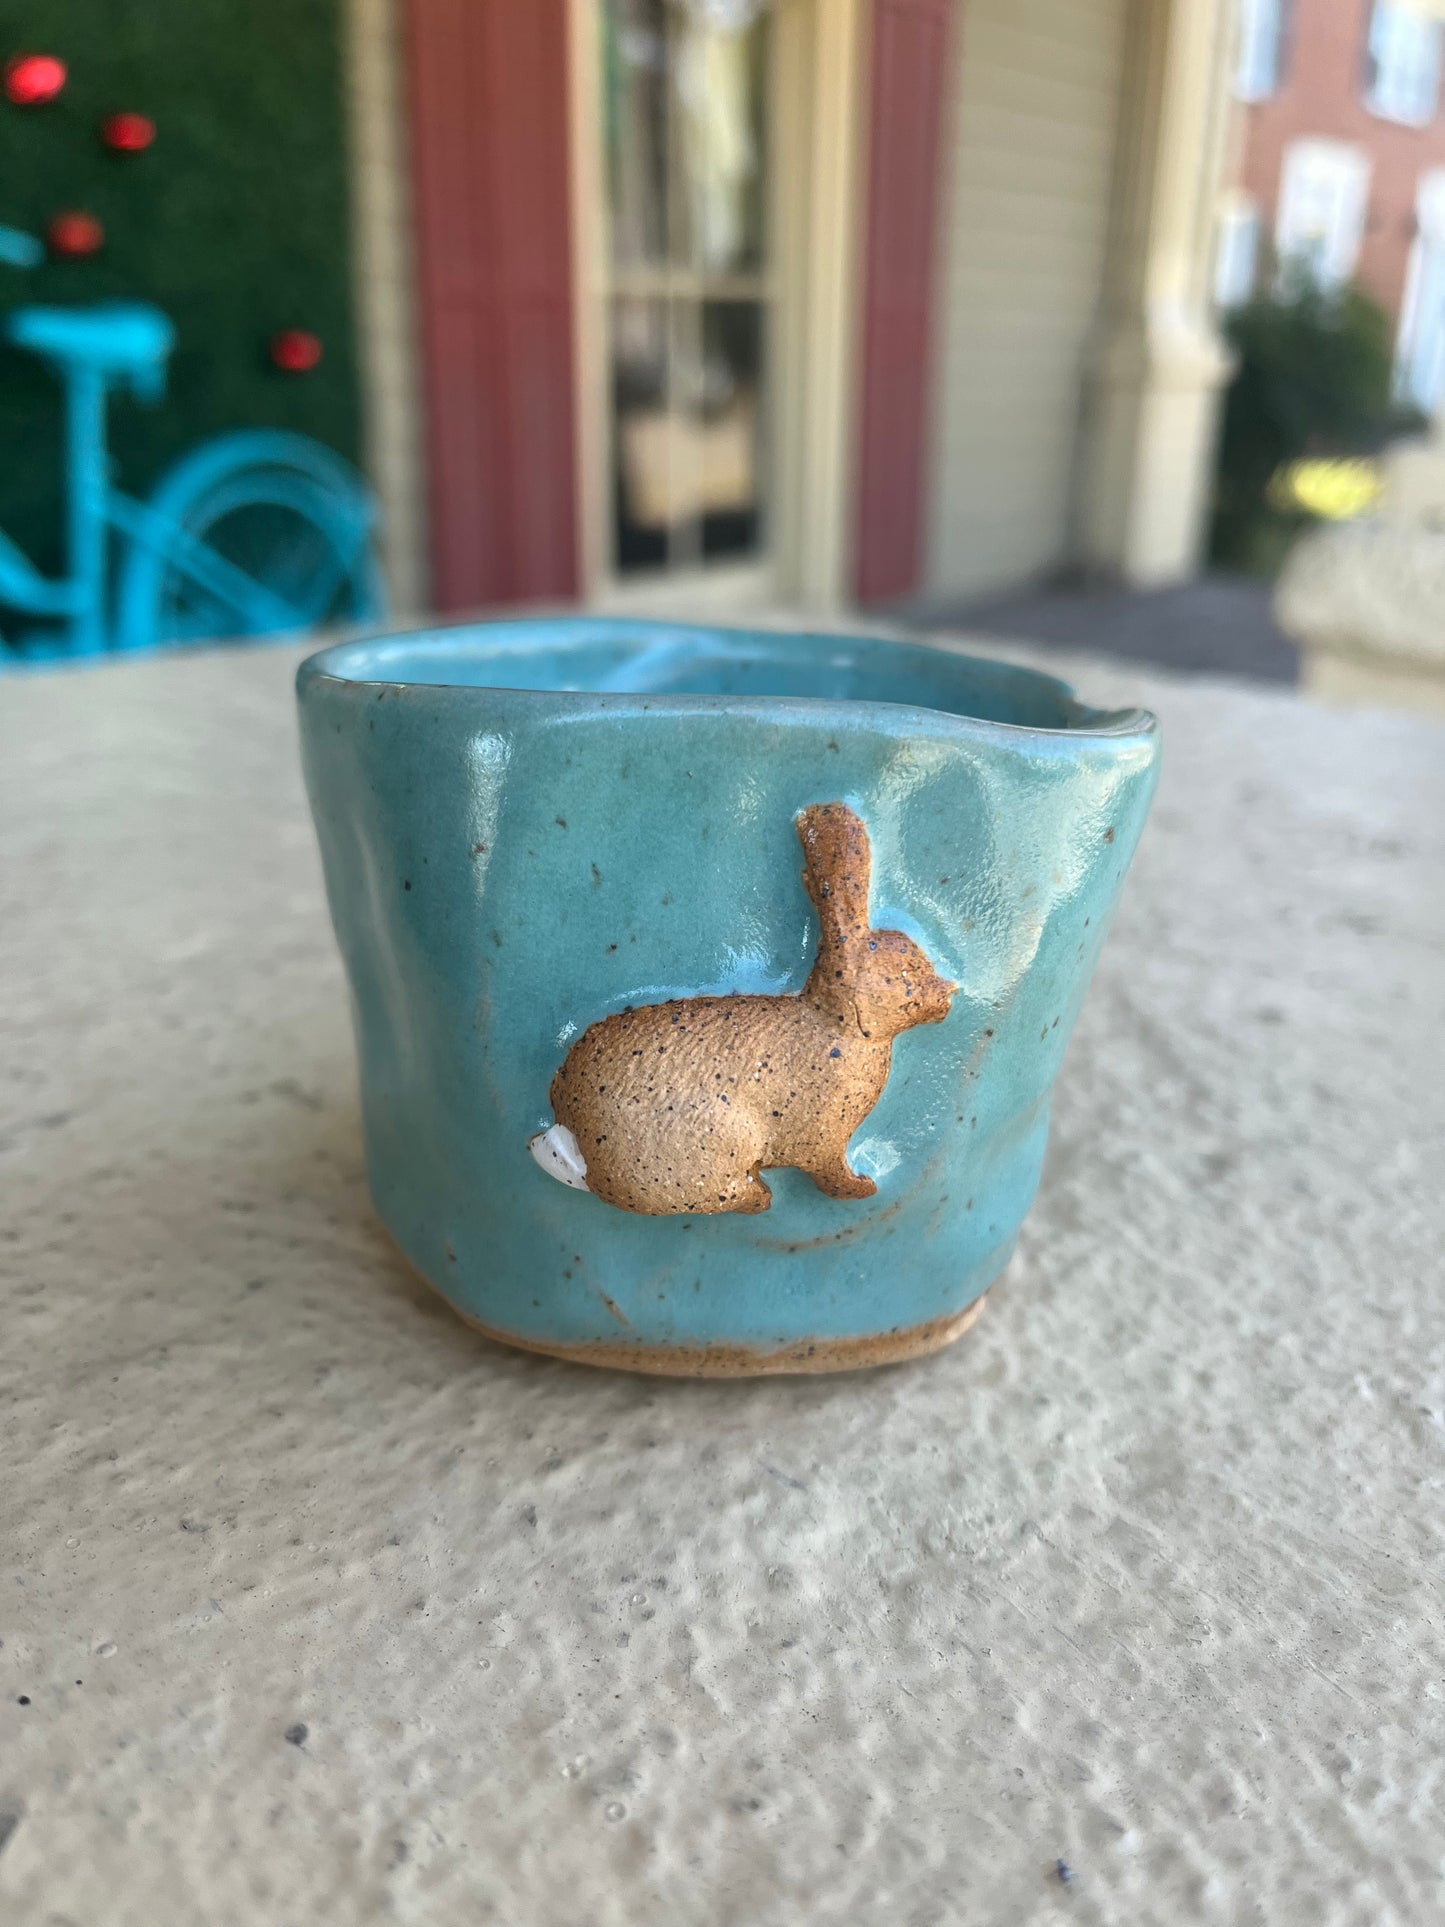 Bunny Oxford Pottery Candles